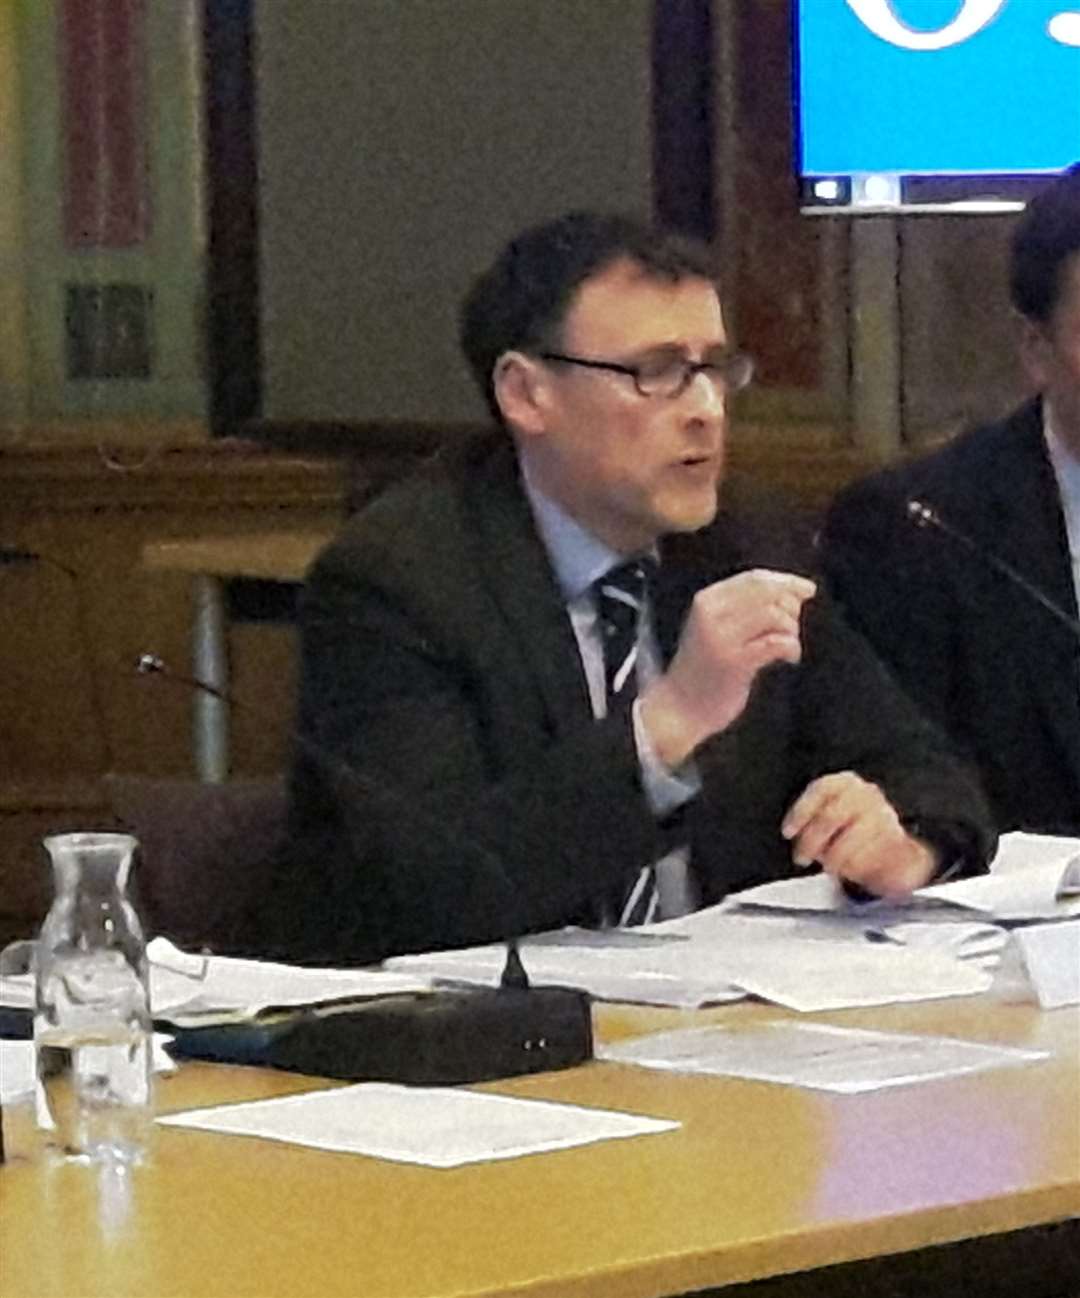 The council's head of development management, Rob Jarman, issued the refusal letter